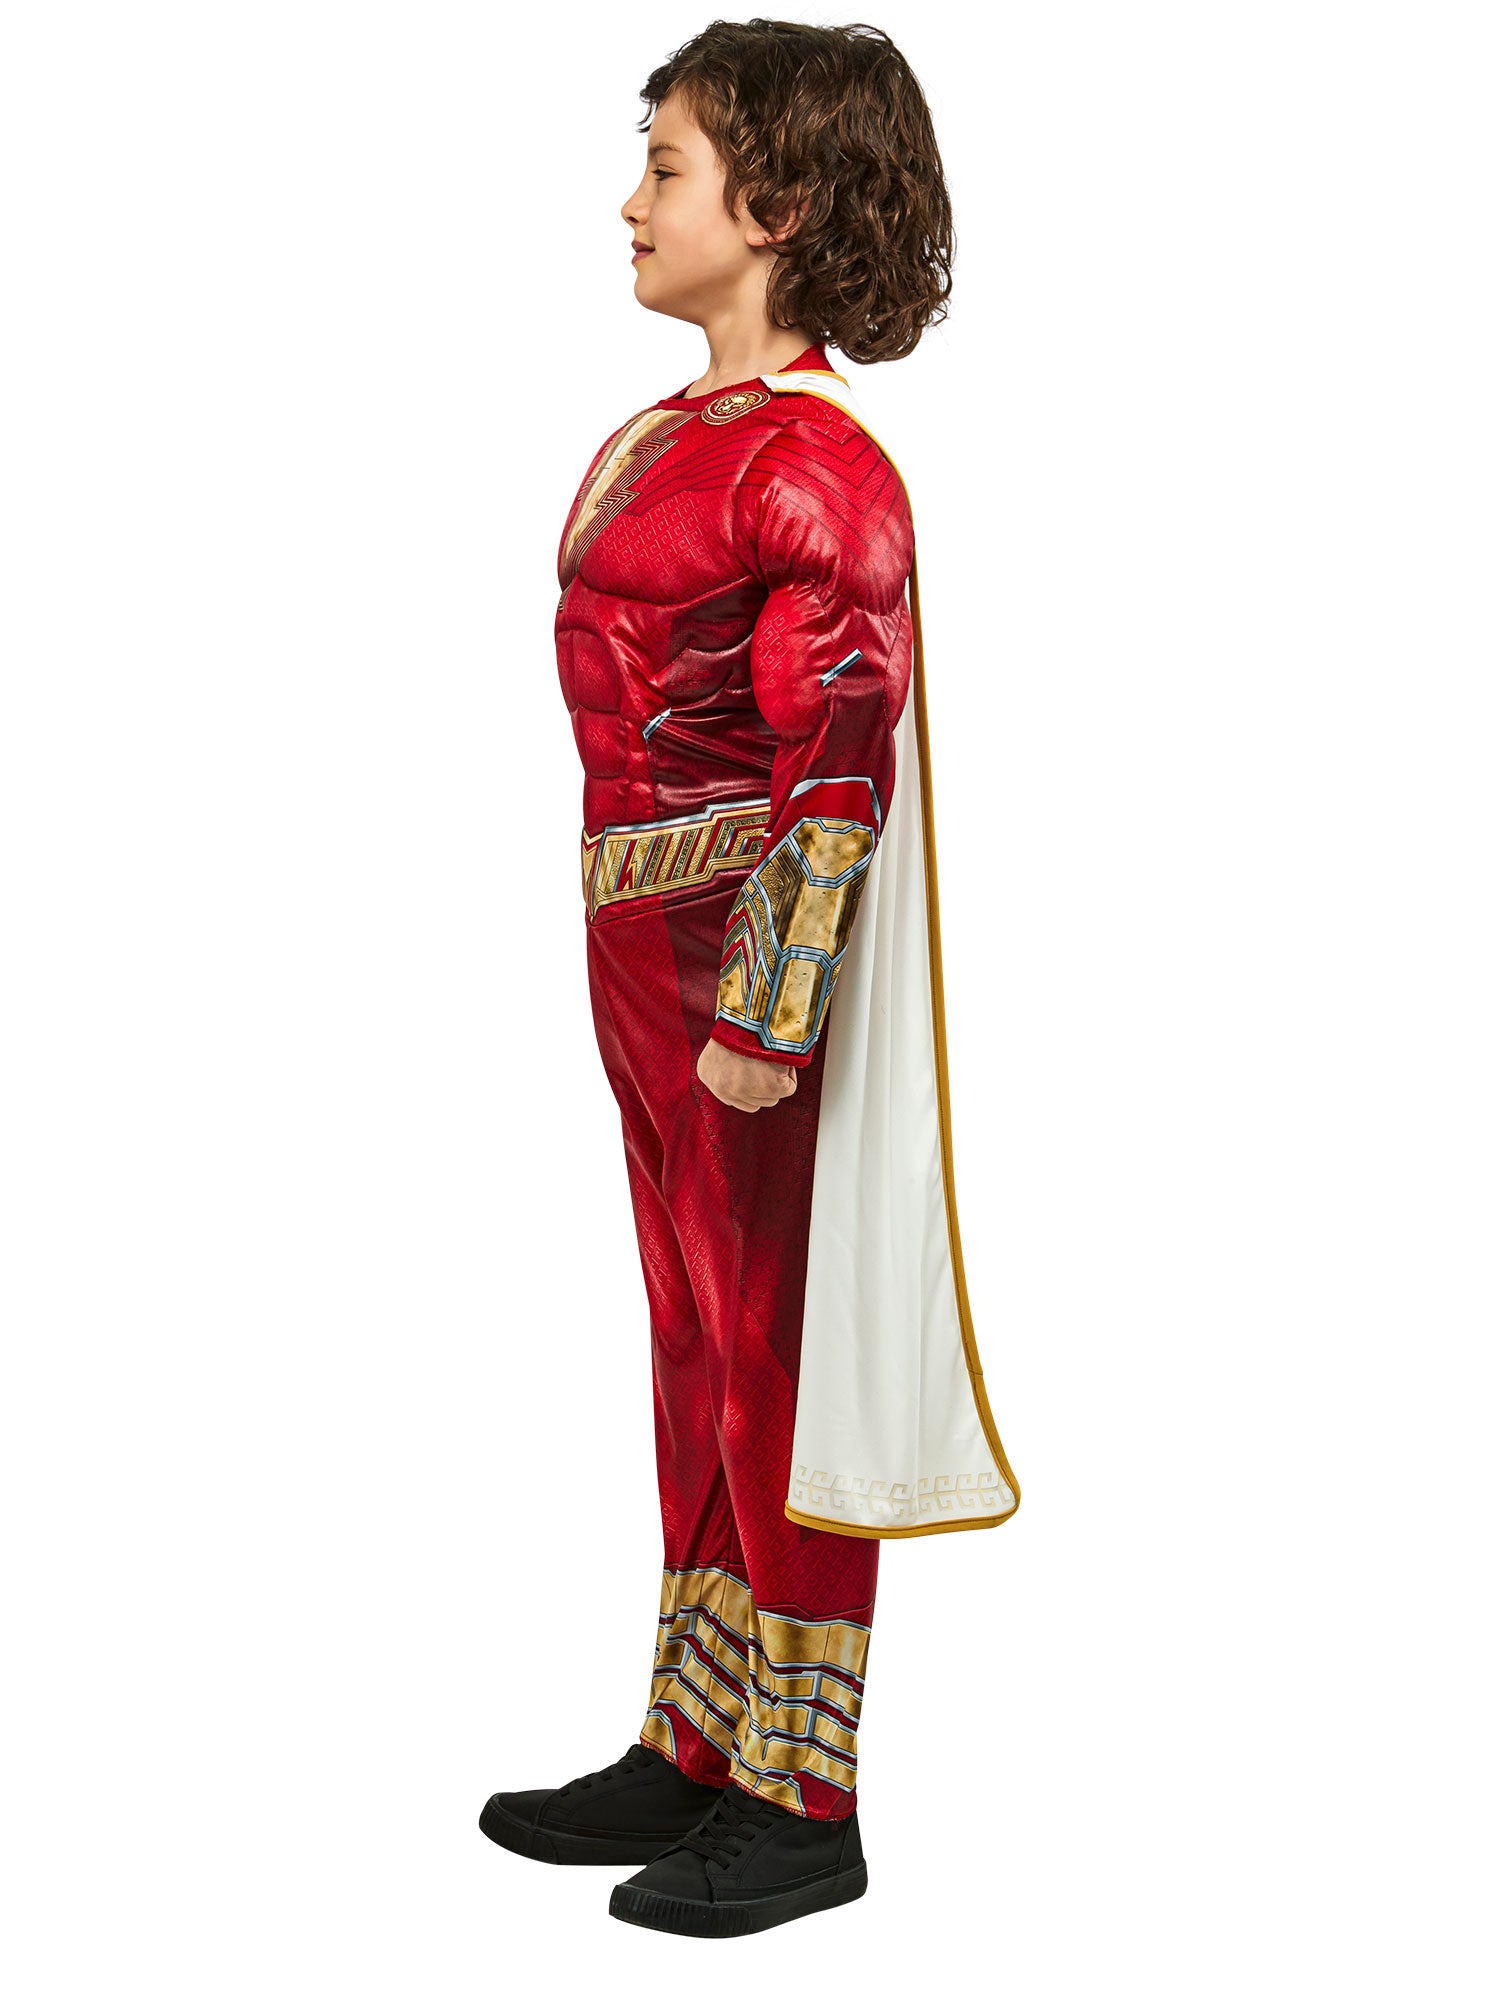 Shazam, Shazam Fury of the Gods, Shazam Fury of the Gods, Red, DC, Kids Costumes, XS, Other